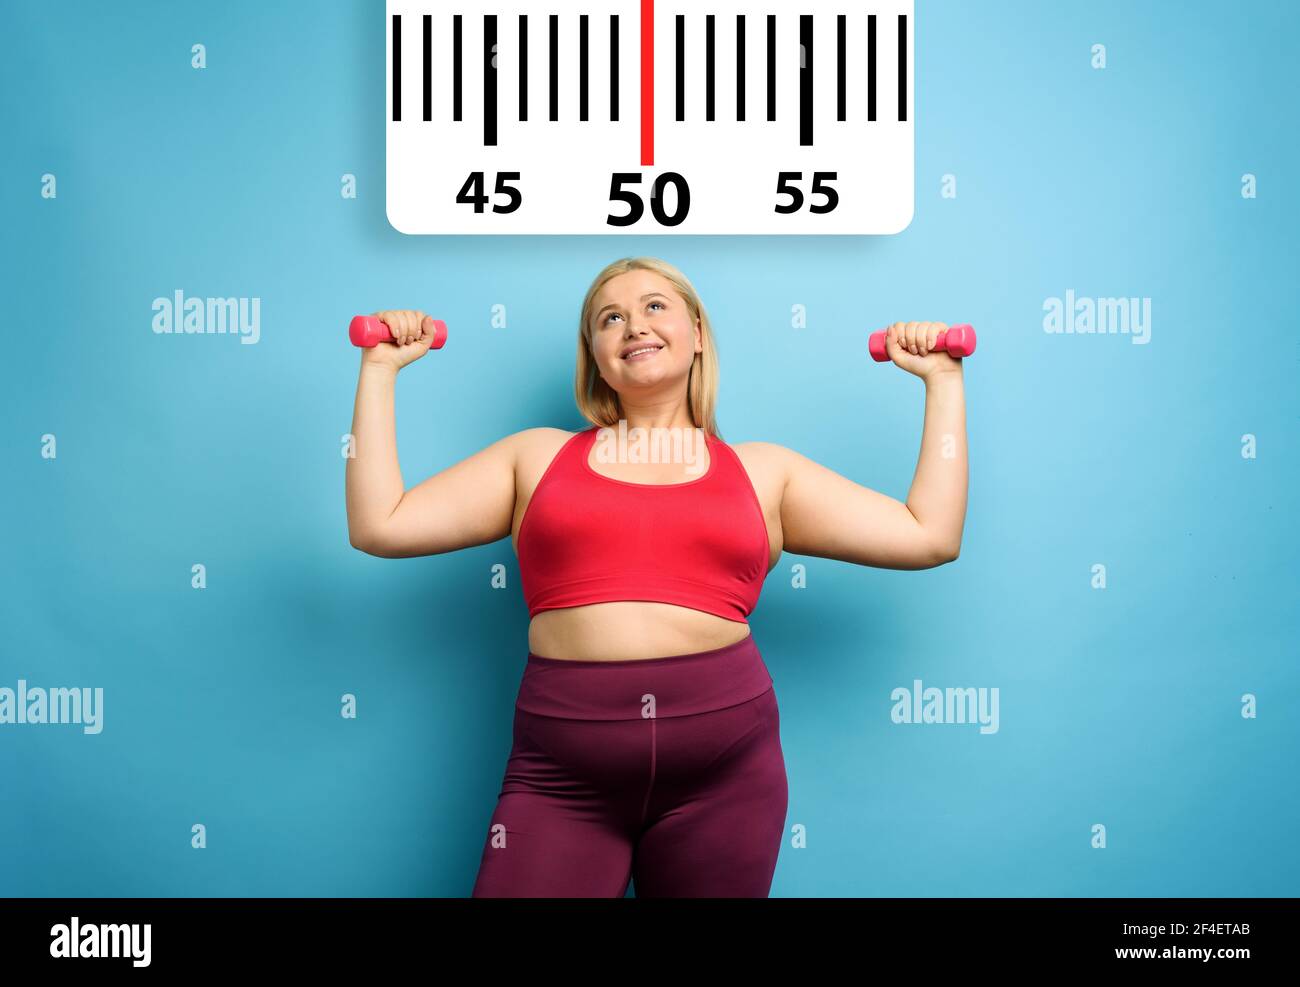 Fat girl does gym at home with satisfied expression because she decrease her weight. Cyan background Stock Photo